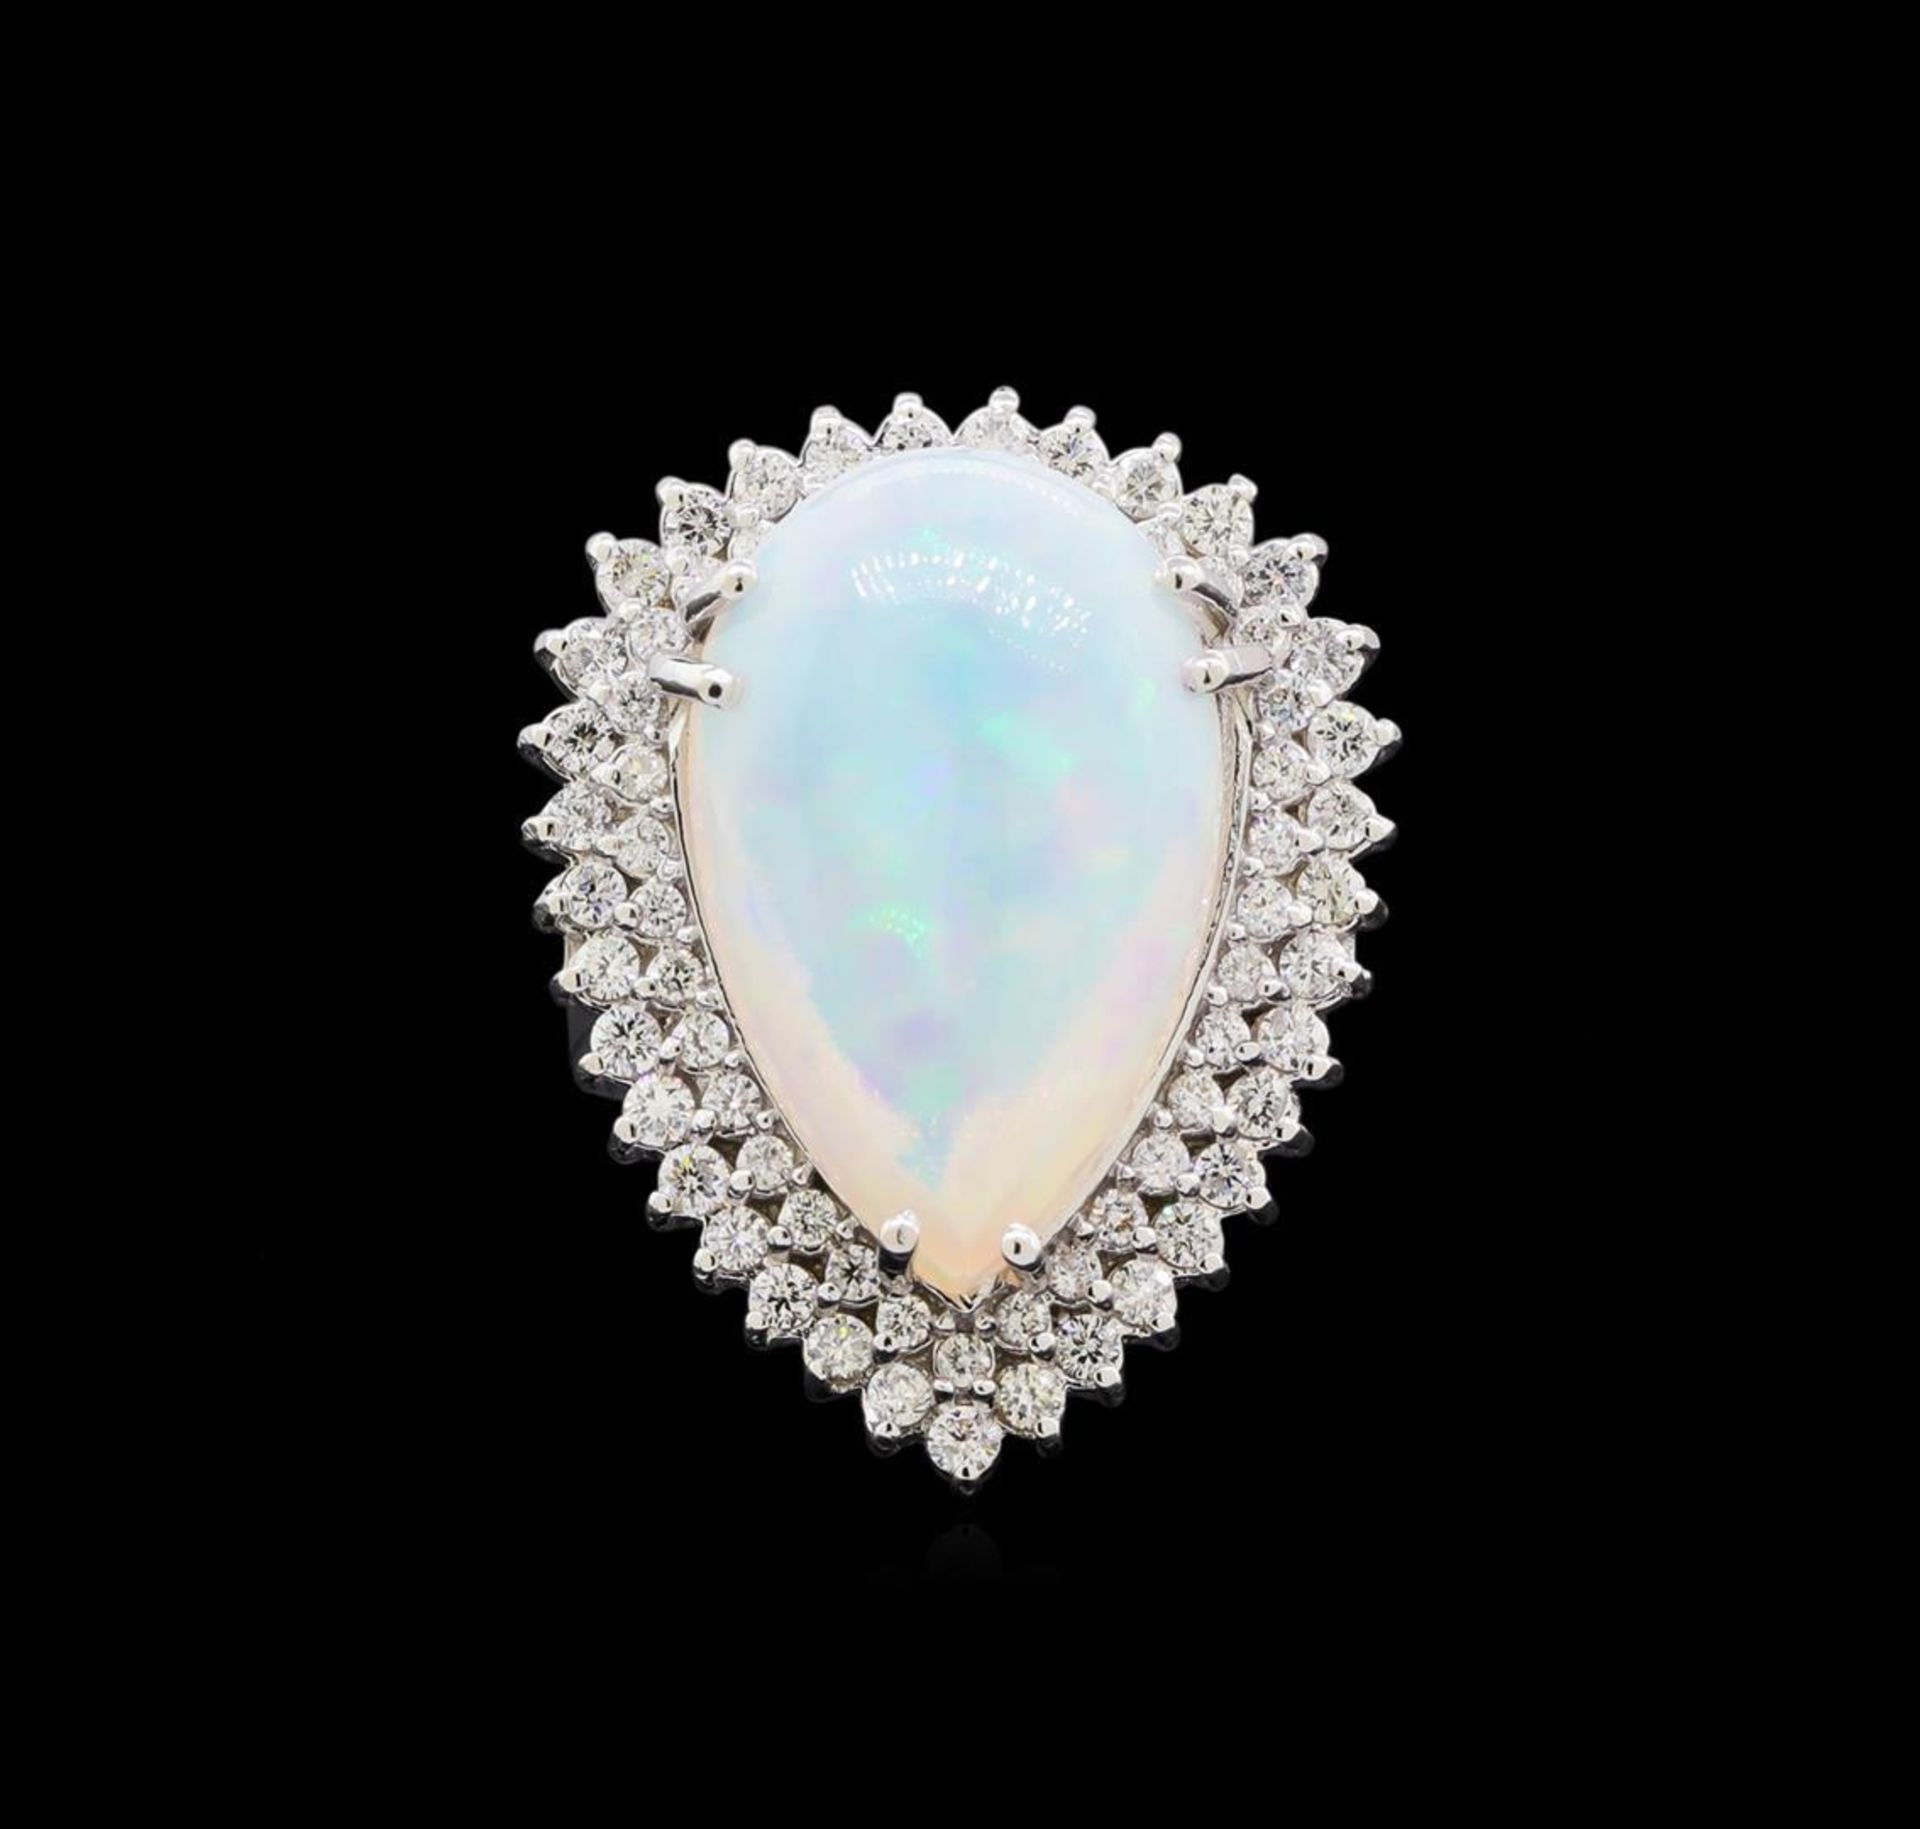 8.65 ctw Opal and Diamond Ring - 14KT White Gold - Image 2 of 5